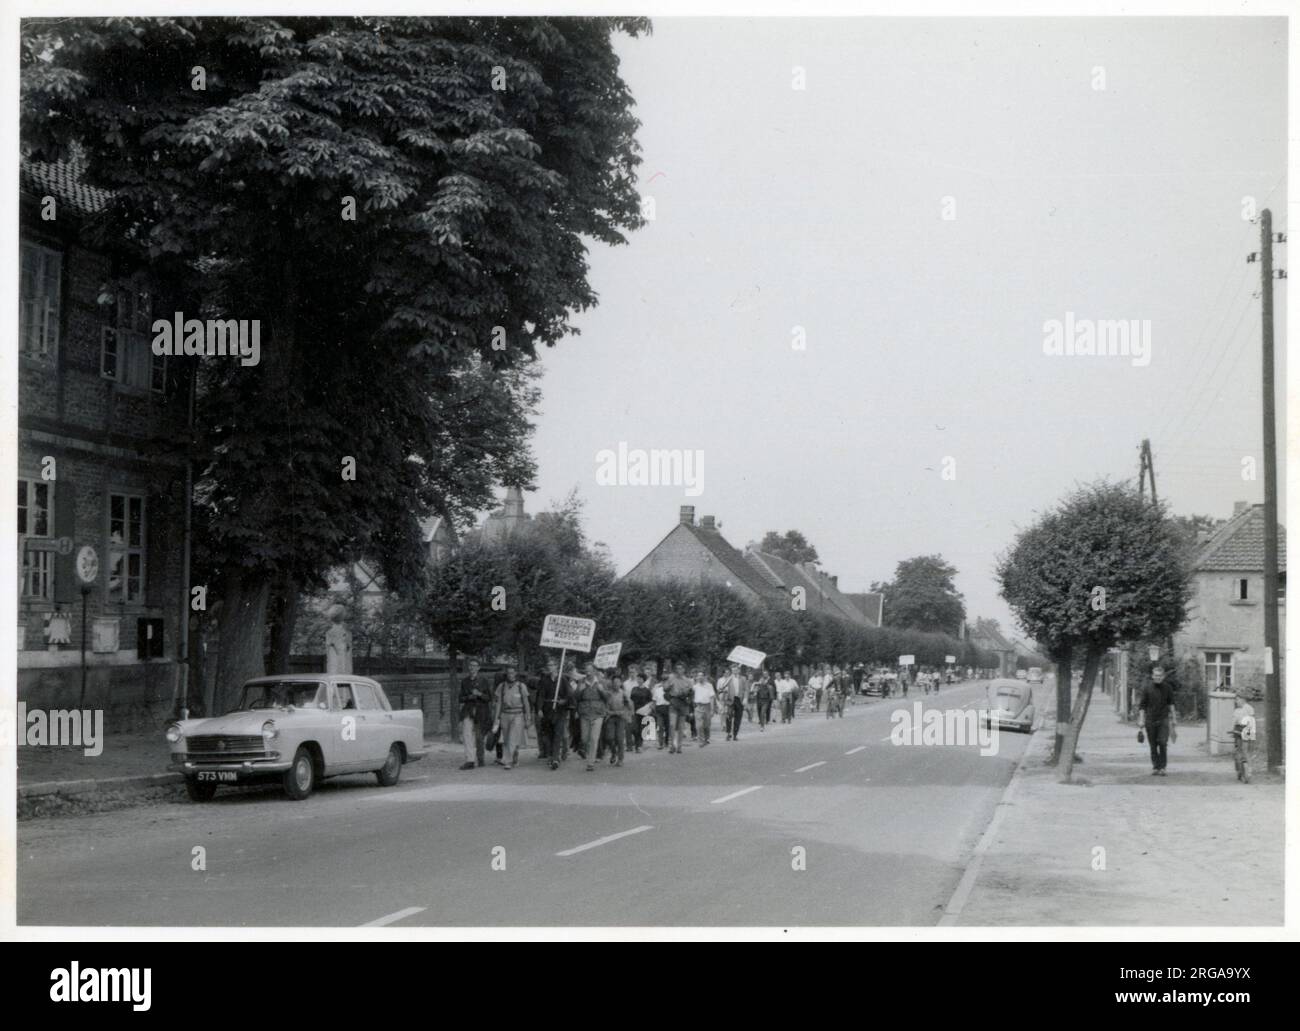 American anti-nuclear 'Ban the Bomb' protestors march from San Francisco to Moscow. Pictured here between Braunschweig (Brunswick) and Helmstedt, Germany - August 6, 1961. Stock Photo